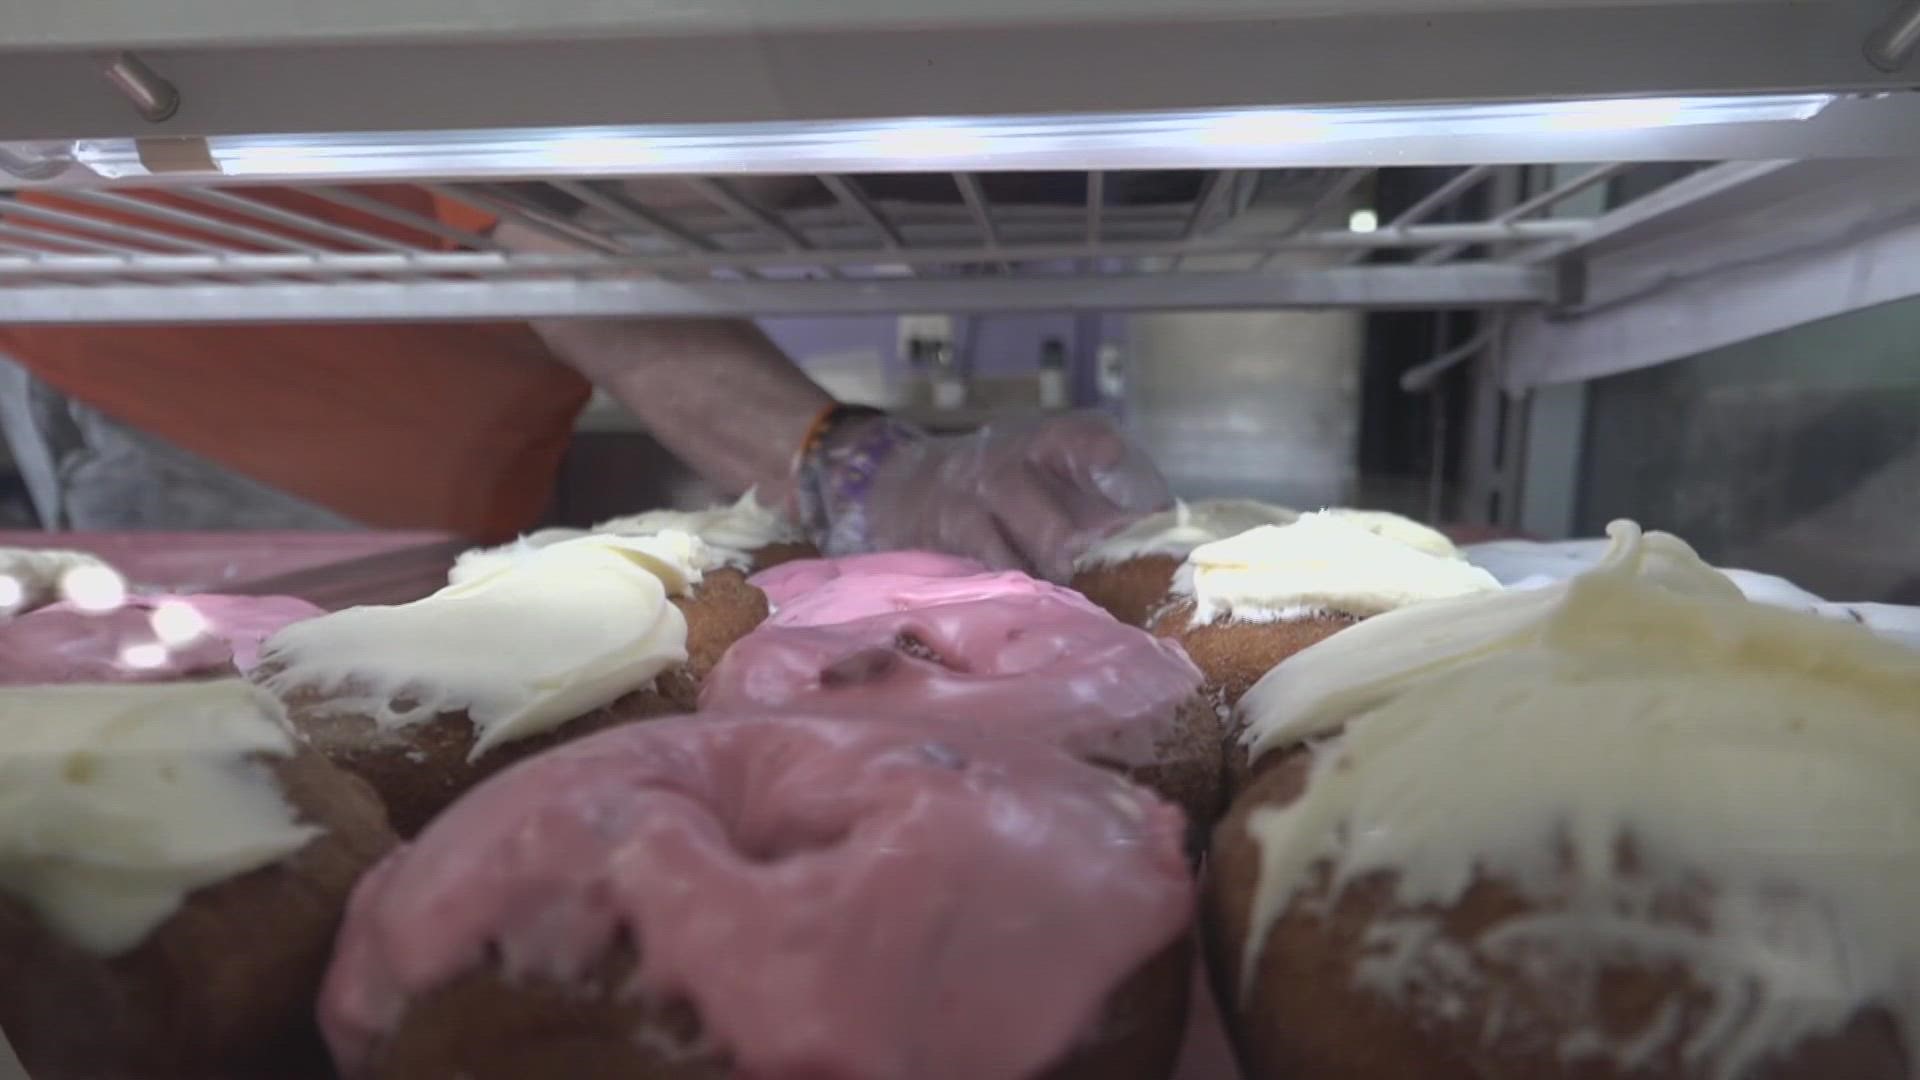 After more than 25 years in business, the bakery on Bryan Road is turning off its ovens for the last time Friday night.